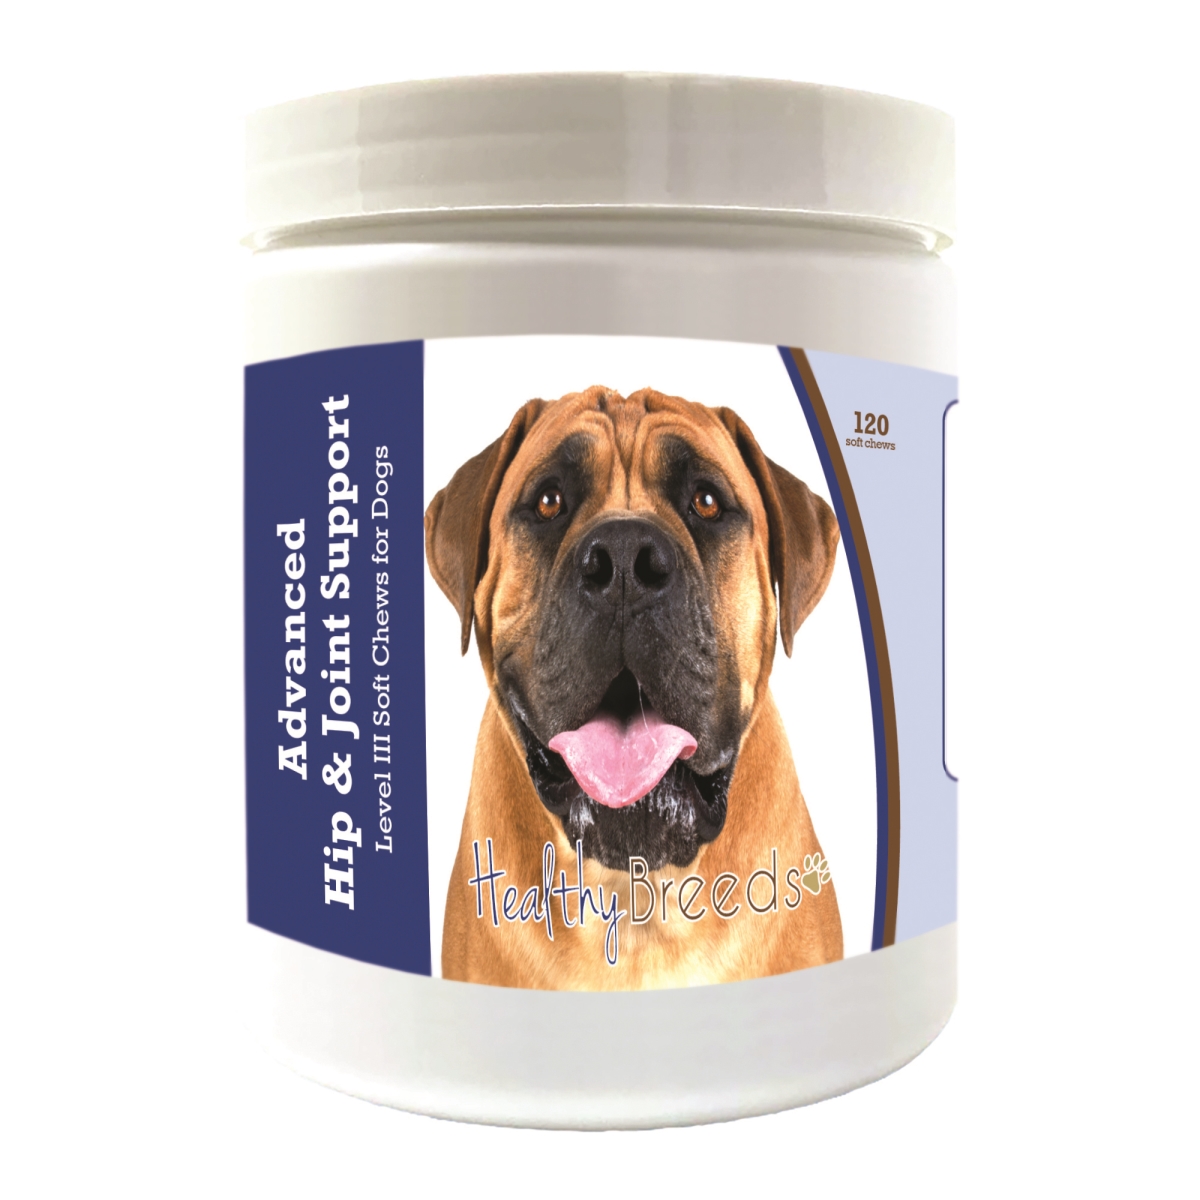 Picture of Healthy Breeds 192959897708 Boerboel Advanced Hip & Joint Support Level III Soft Chews for Dogs